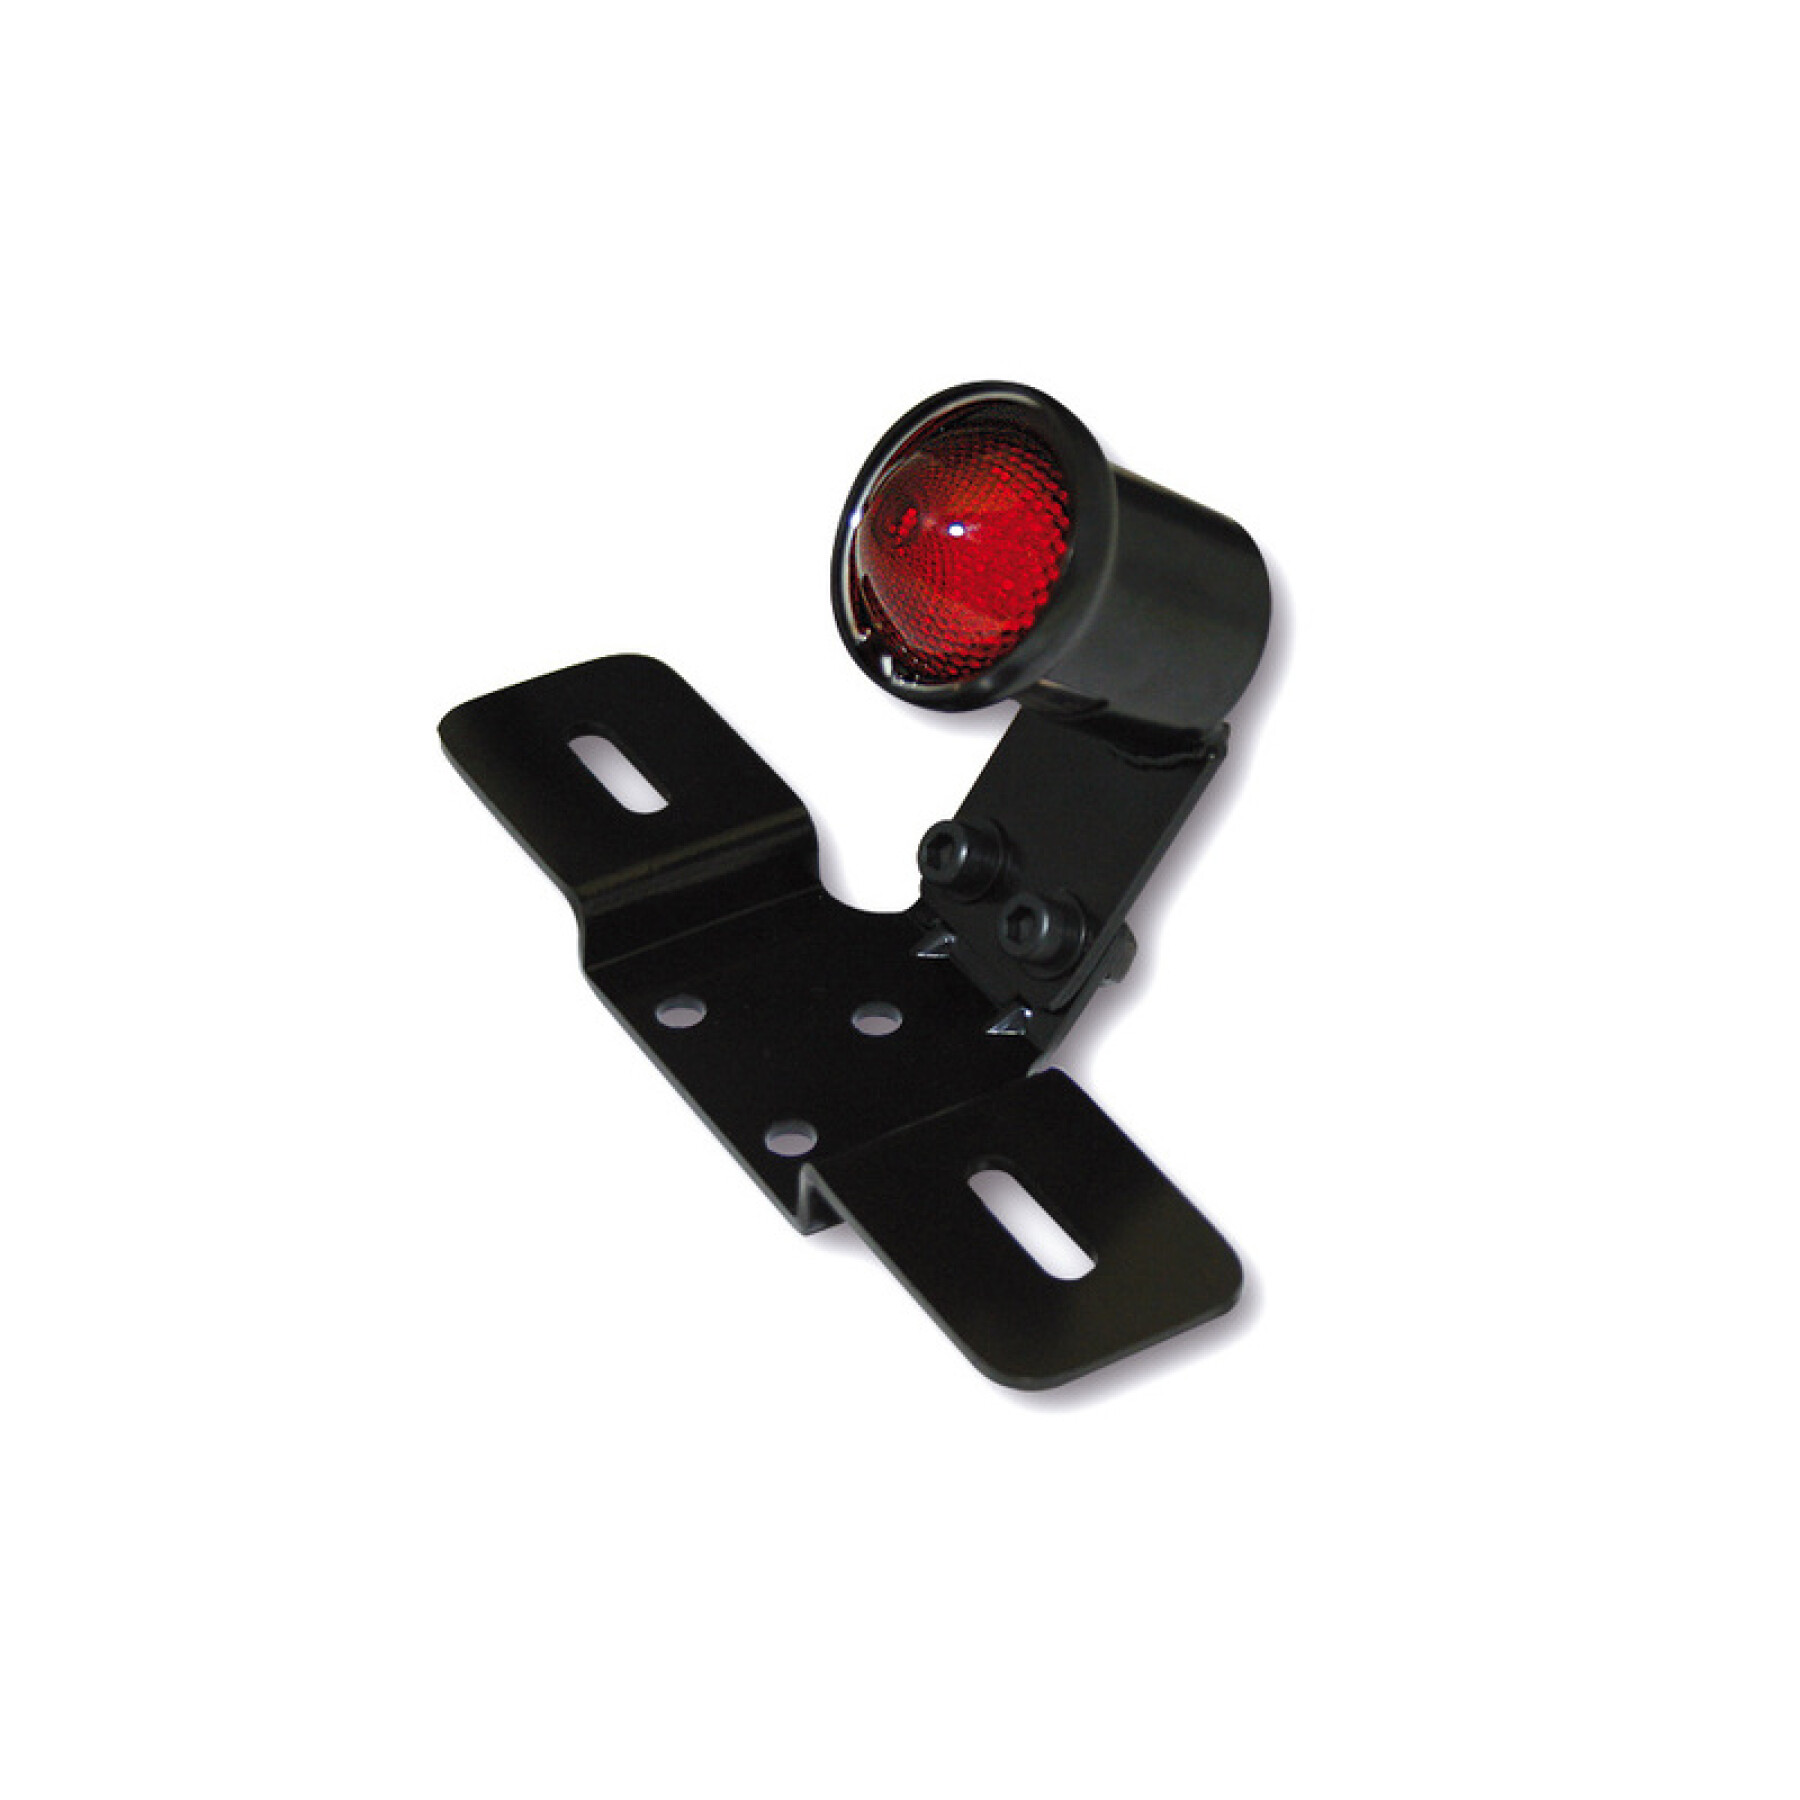 Motorcycle led tail light with license plate holder Shinyo Old School